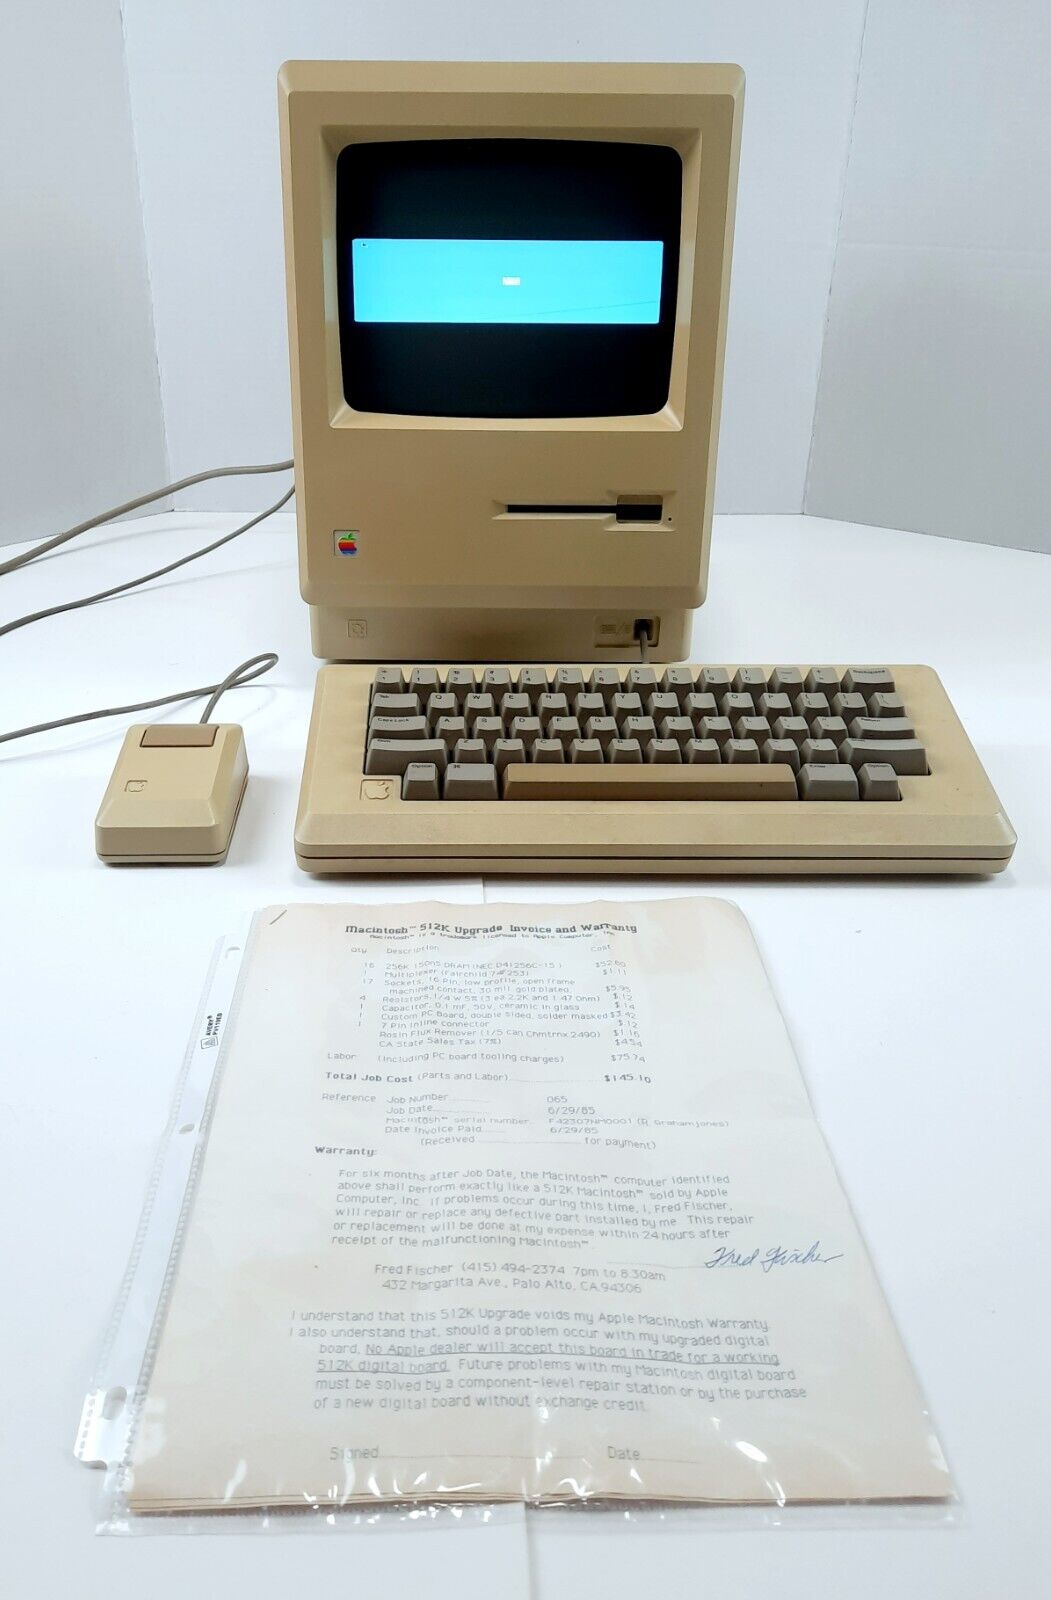 Apple Macintosh M0001 Computer 1984 W/Mouse and Keyboard Number Matching AS IS